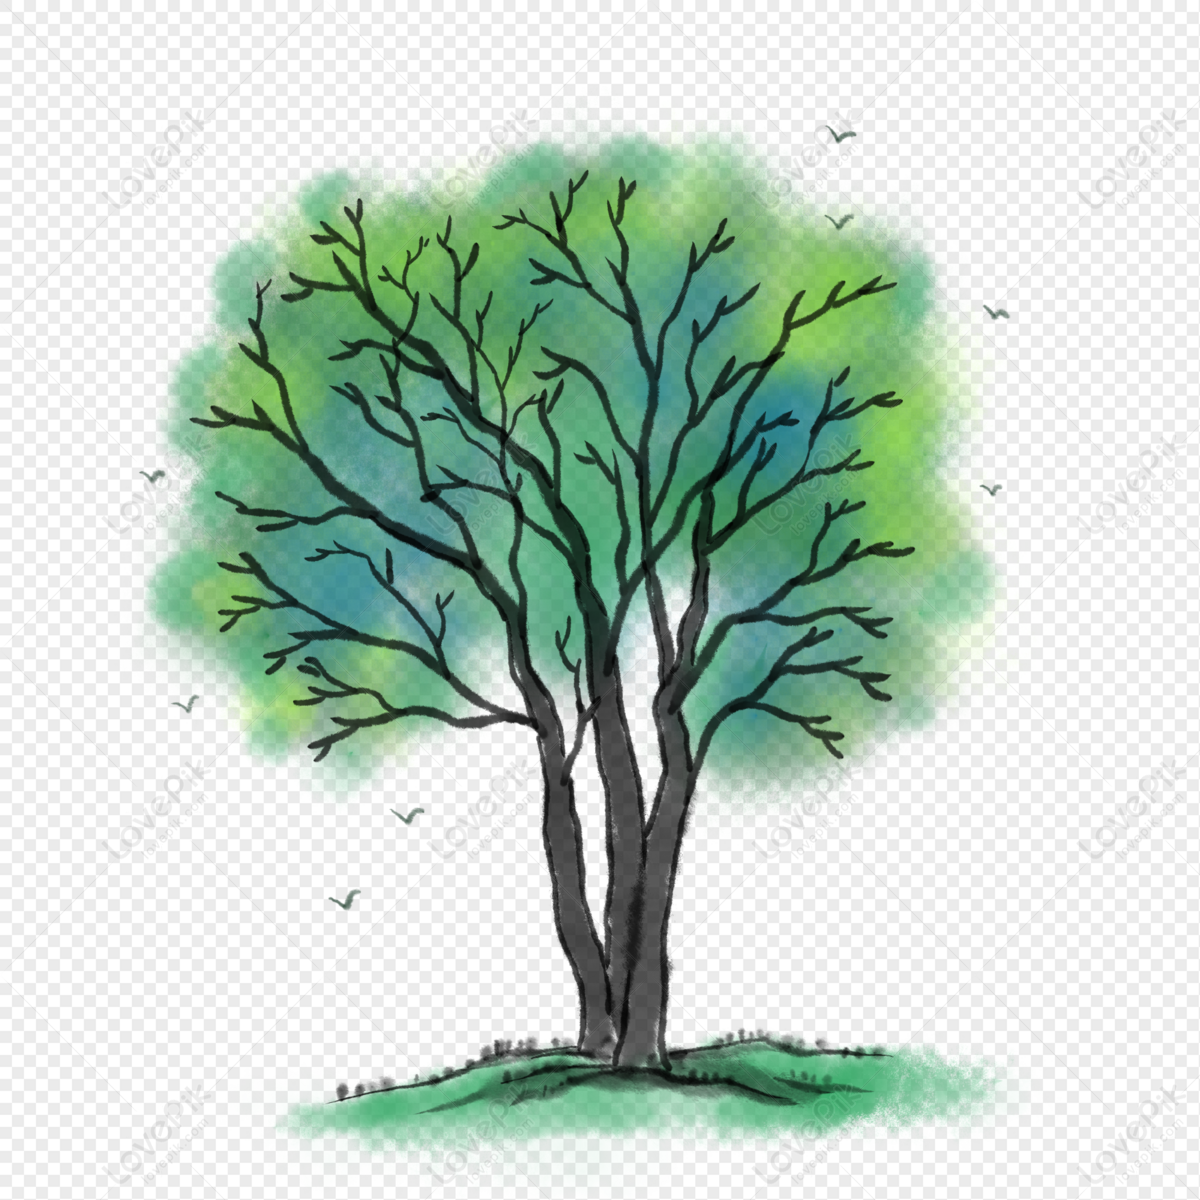 china house clipart with trees